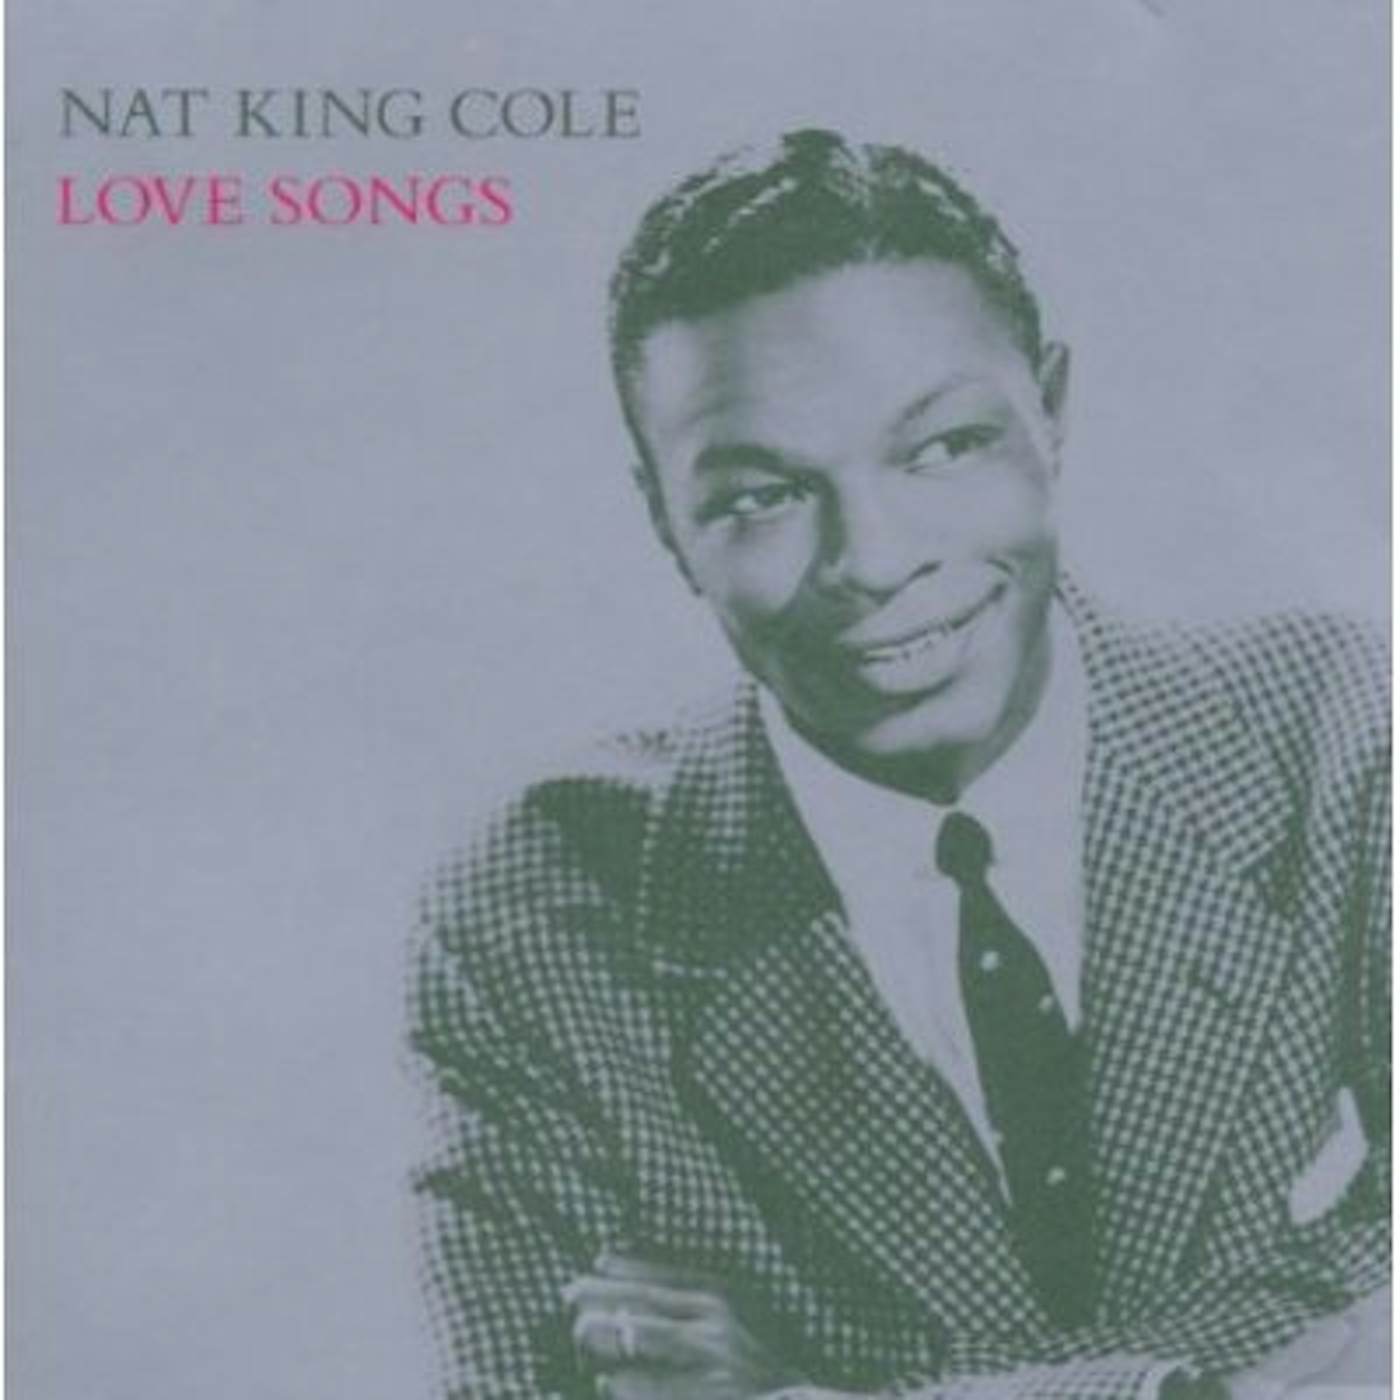 Nat King Cole LOVE SONGS CD